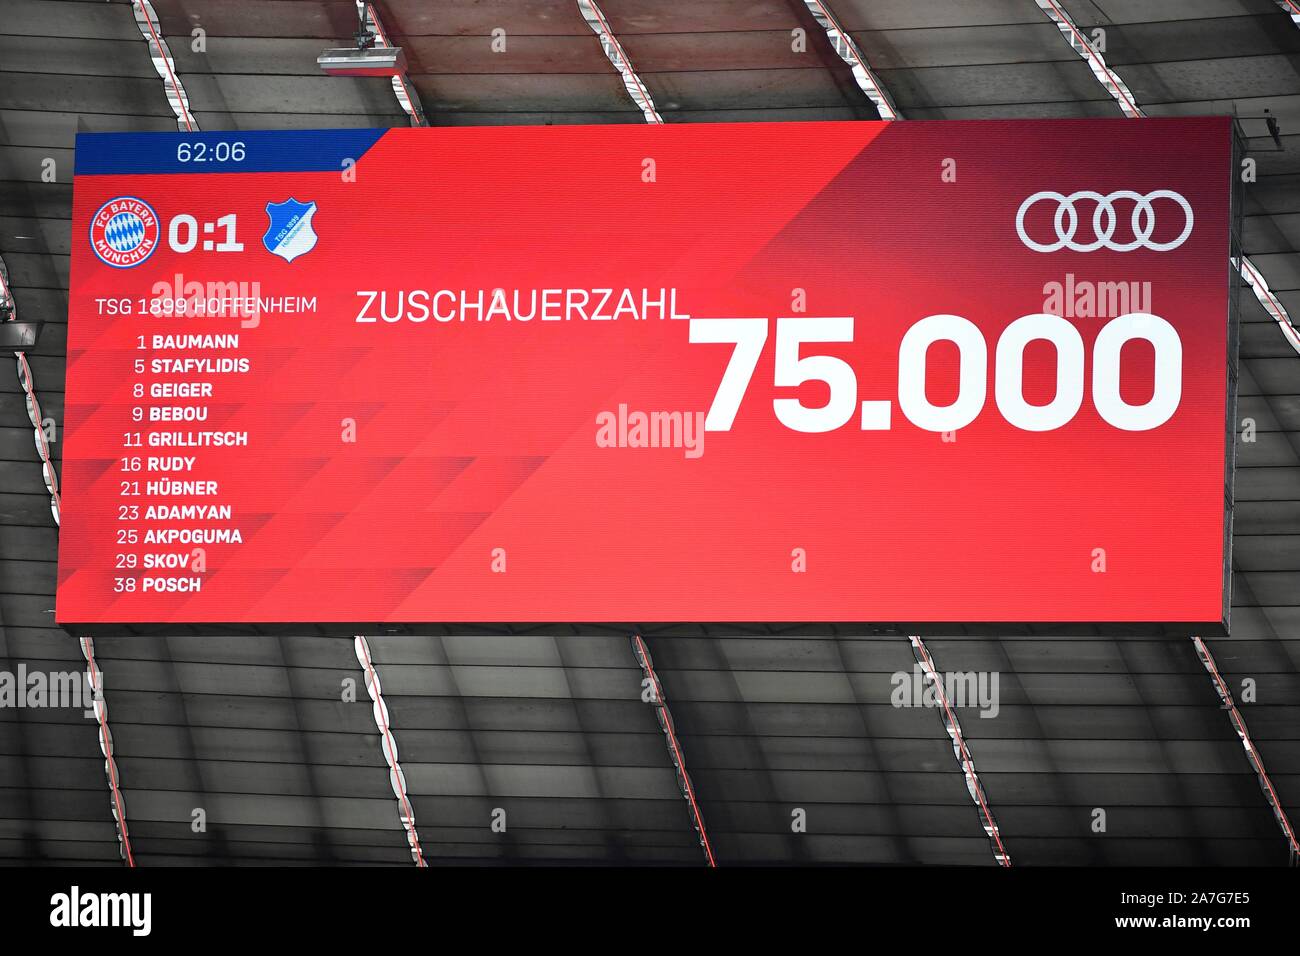 Scoreboard Number of spectators, sold out Allianz Arena, Munich, Bavaria, Germany Stock Photo